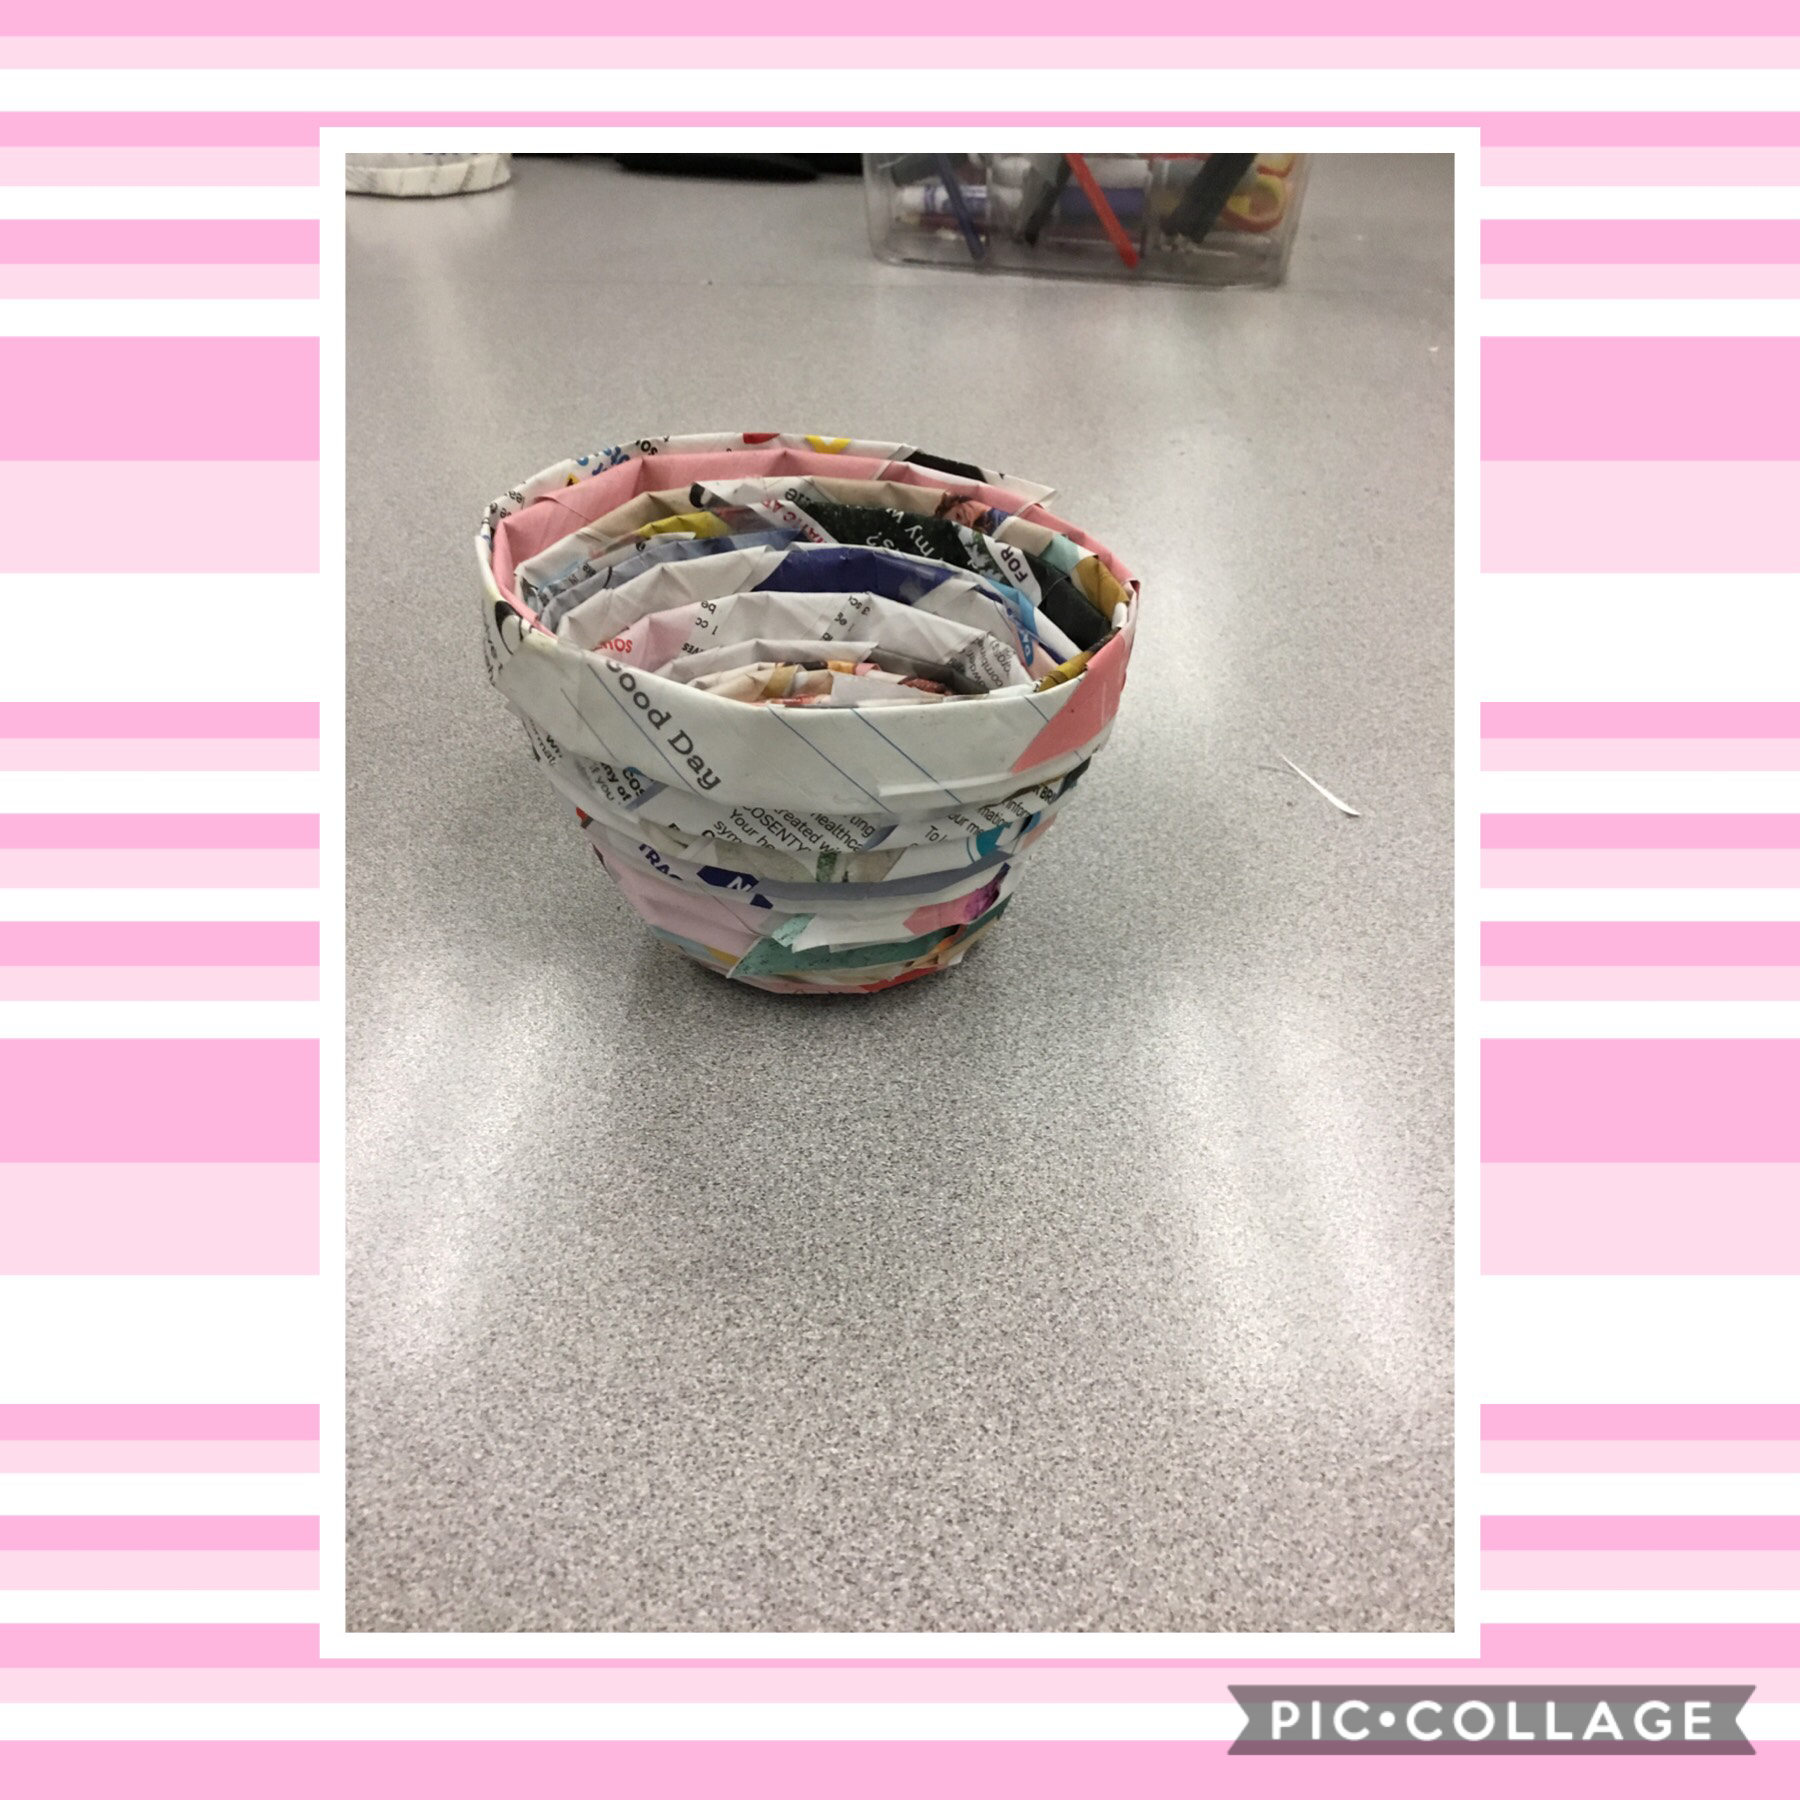 Look what I made its a magazine bowl in art class love art 🖼 🖼🖼🖼🖼